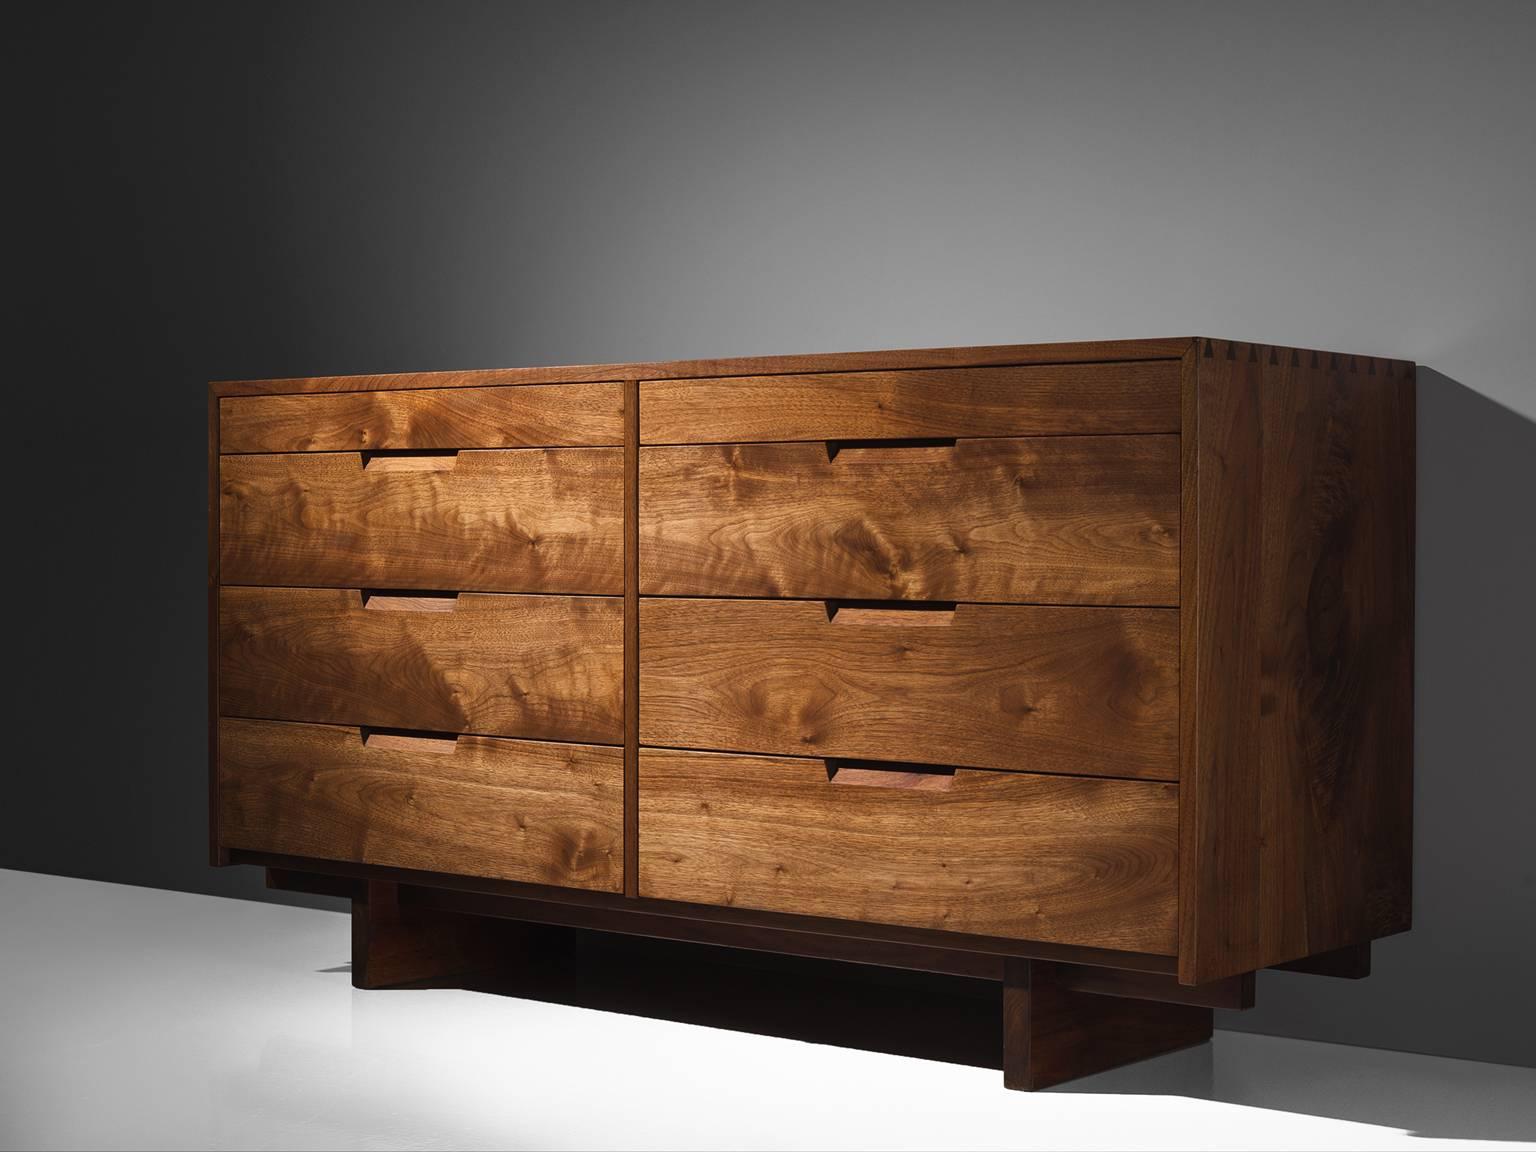 George Nakashima, cabinet in walnut, New Hope, PA, 1955.

This cabinet features eight drawers, executed in walnut with traditional and finished with archetypical dovetail Nakashima wood-joints. The cabinet rests on two slabs of solid walnut that